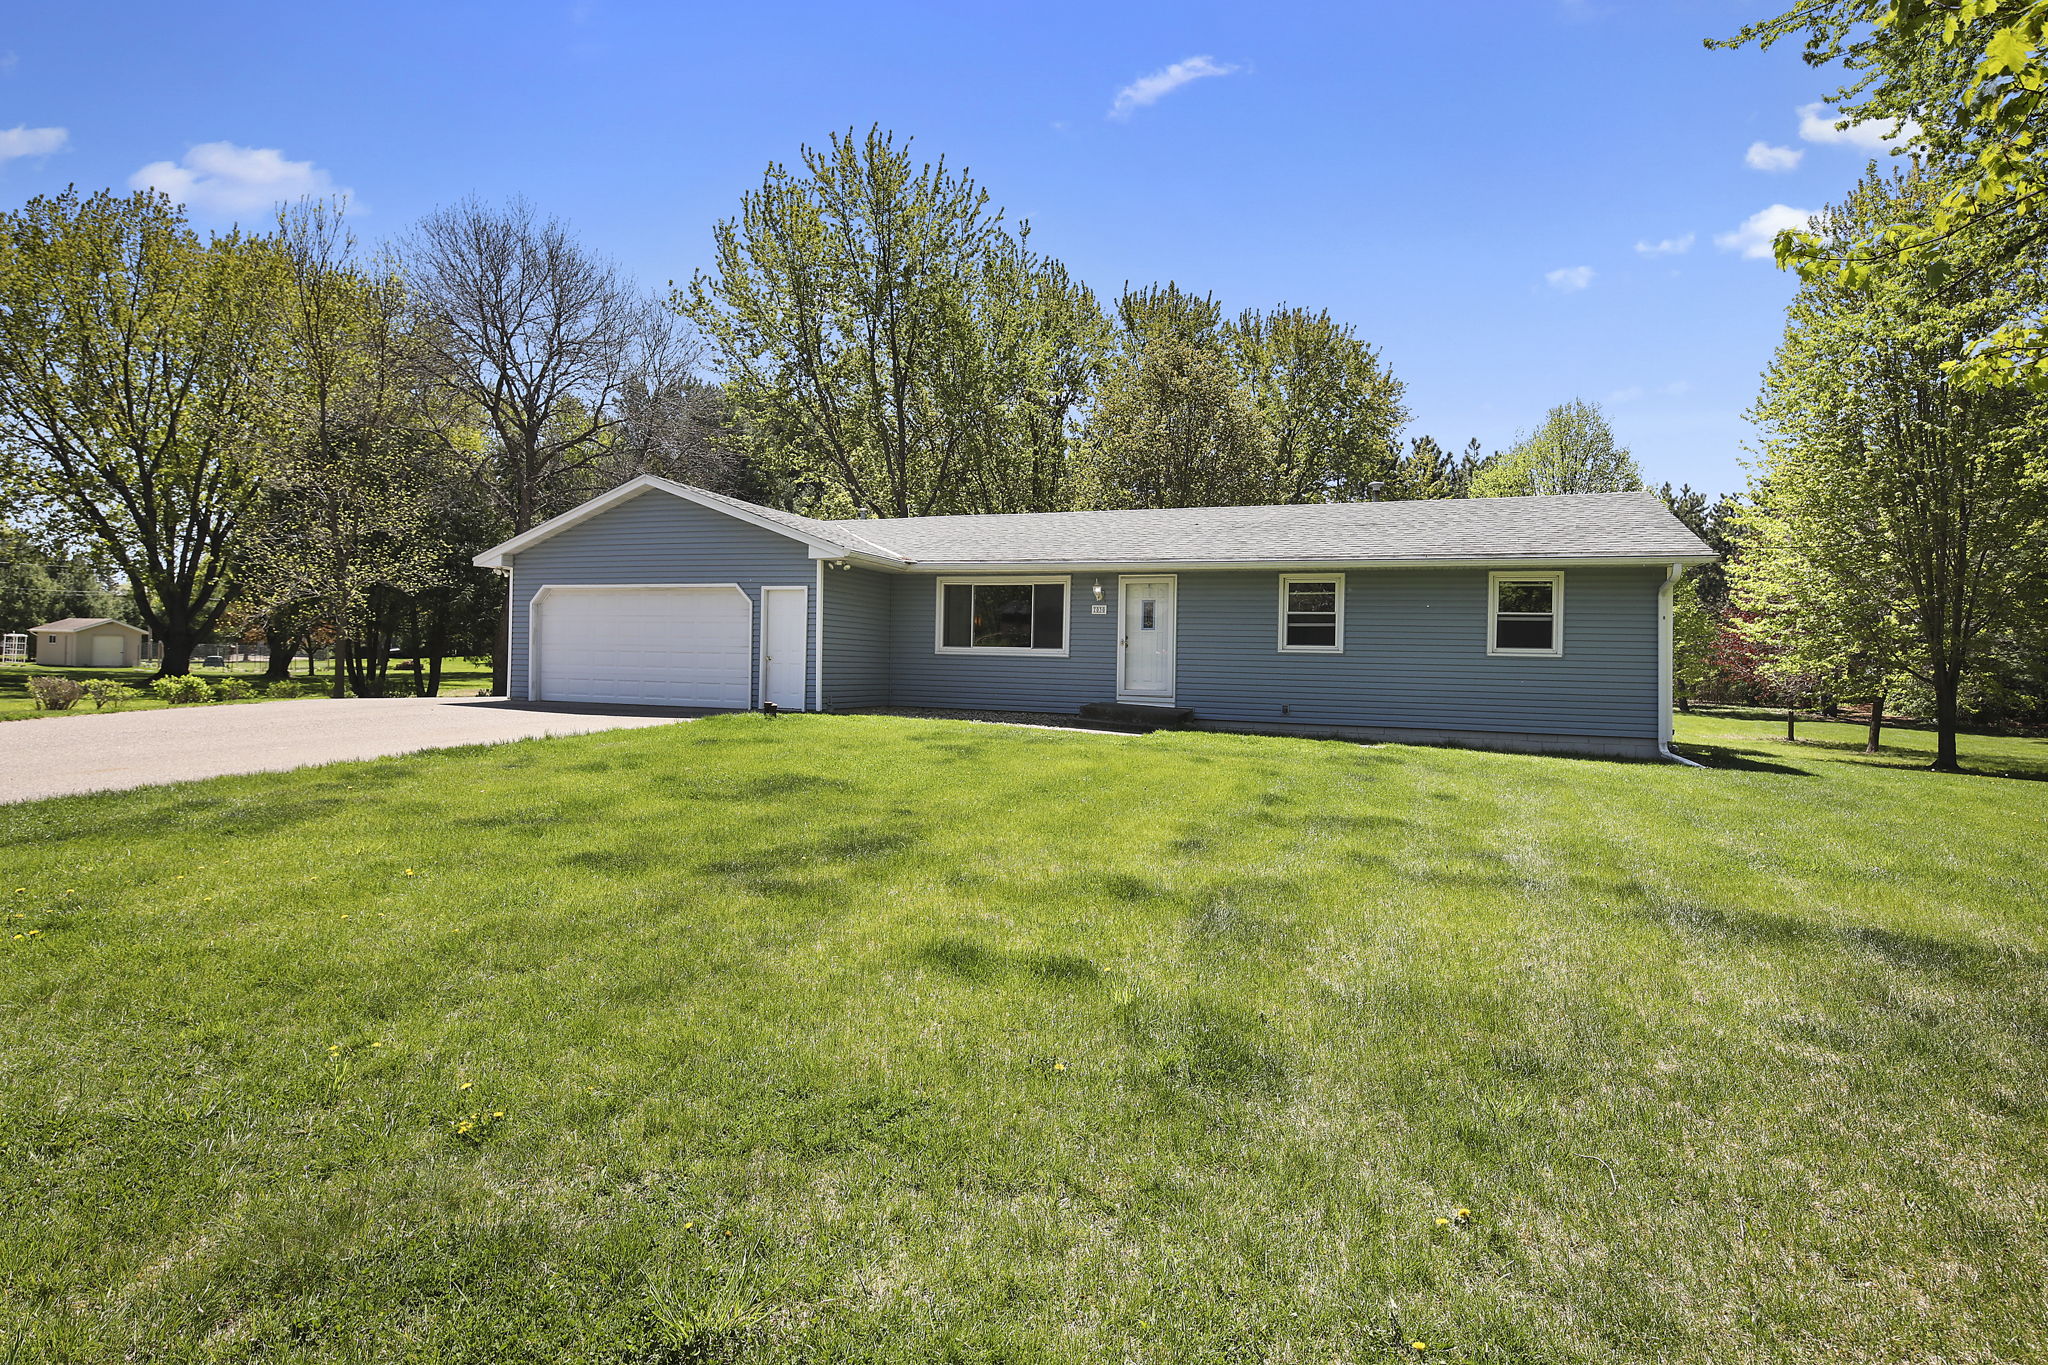  7030 152nd Ave NW, Ramsey, MN 55303, US Photo 2